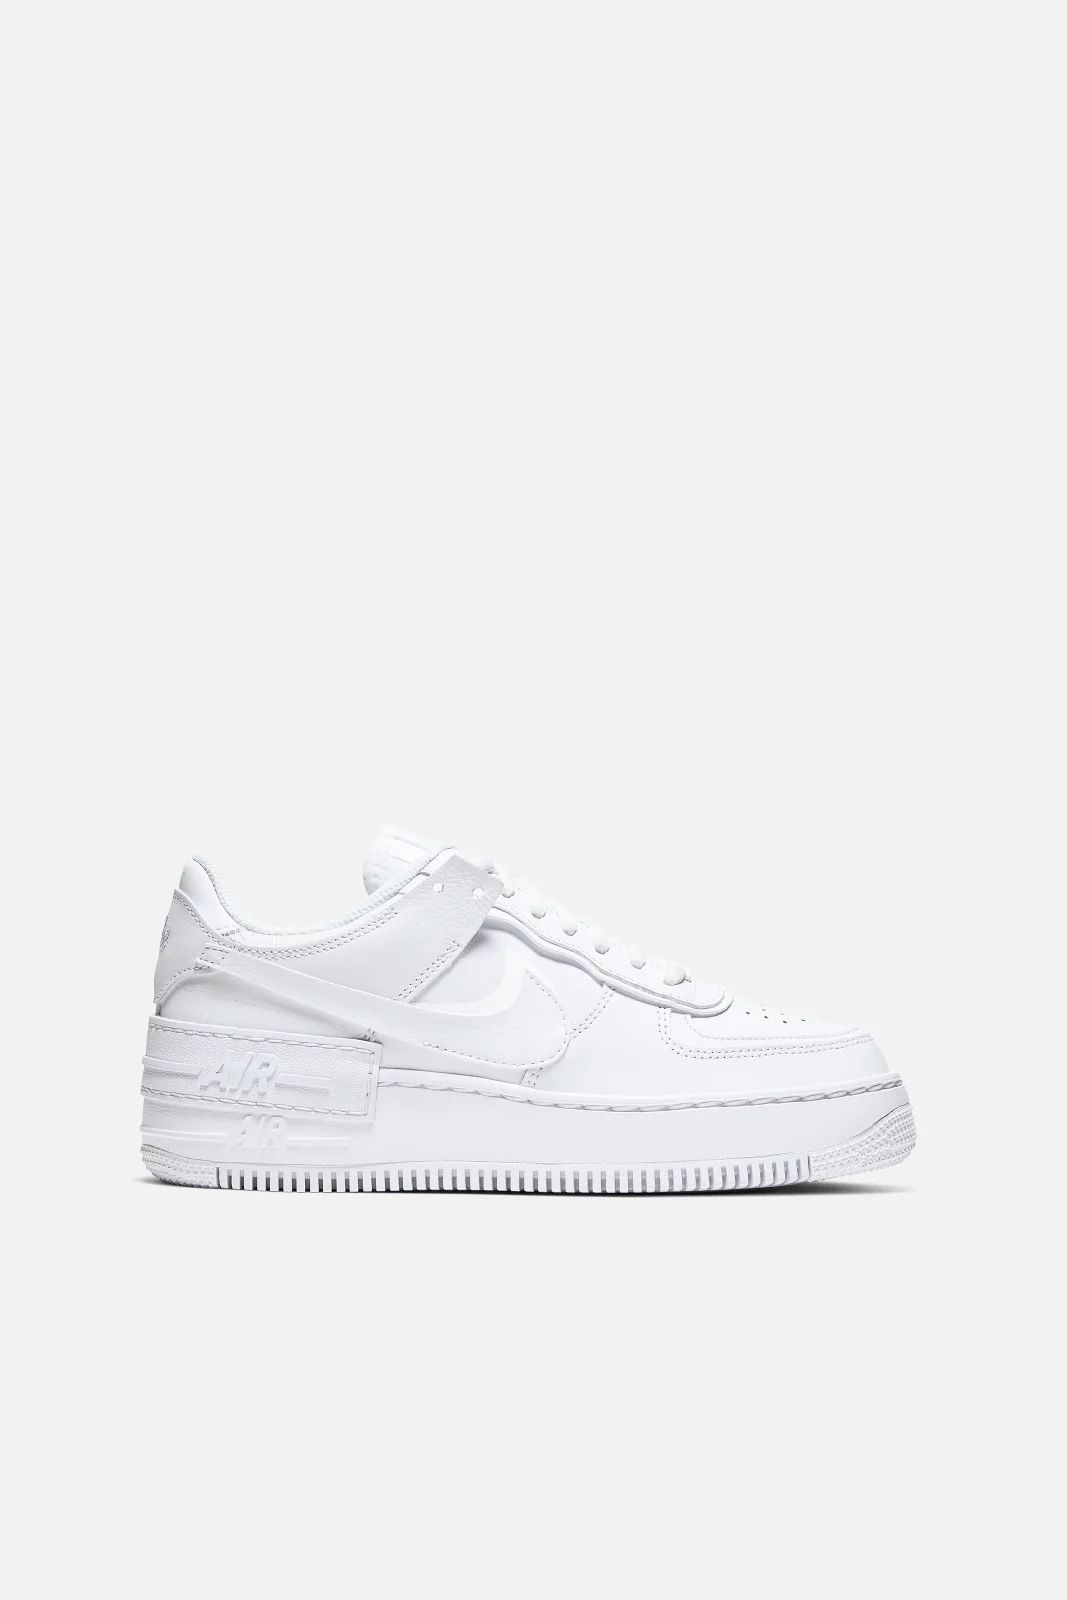 Air Force 1 ShadowNikeBest sellerNew$110.00 | Bandier